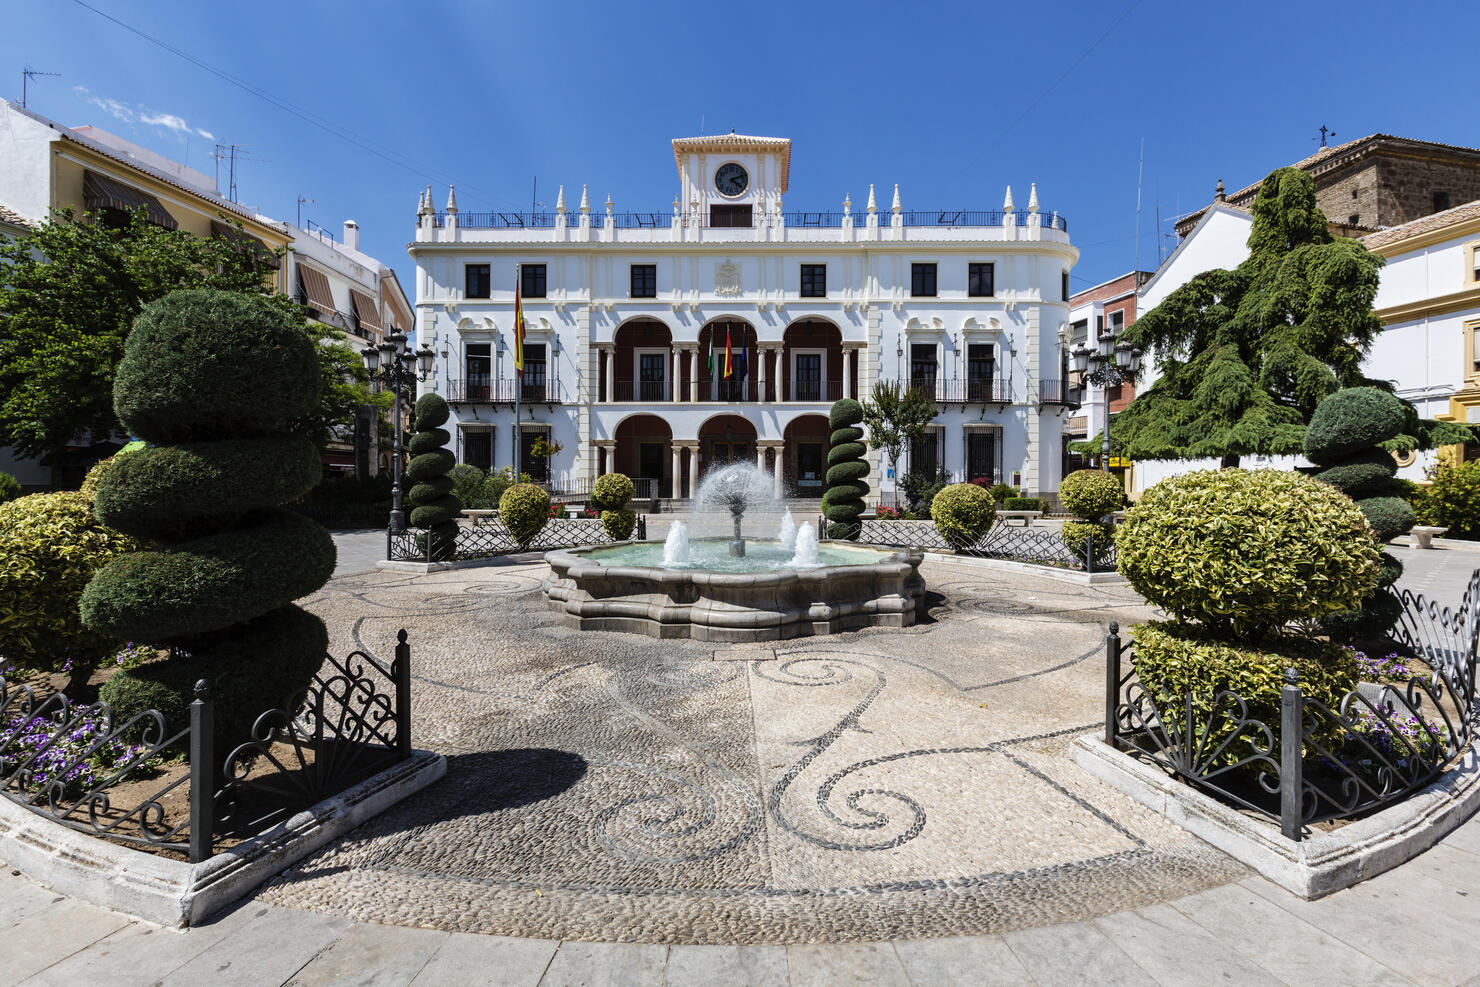 Mansion and courtyard with fountain and shrubs, Priego de Cordoba, Andalusia, Spain